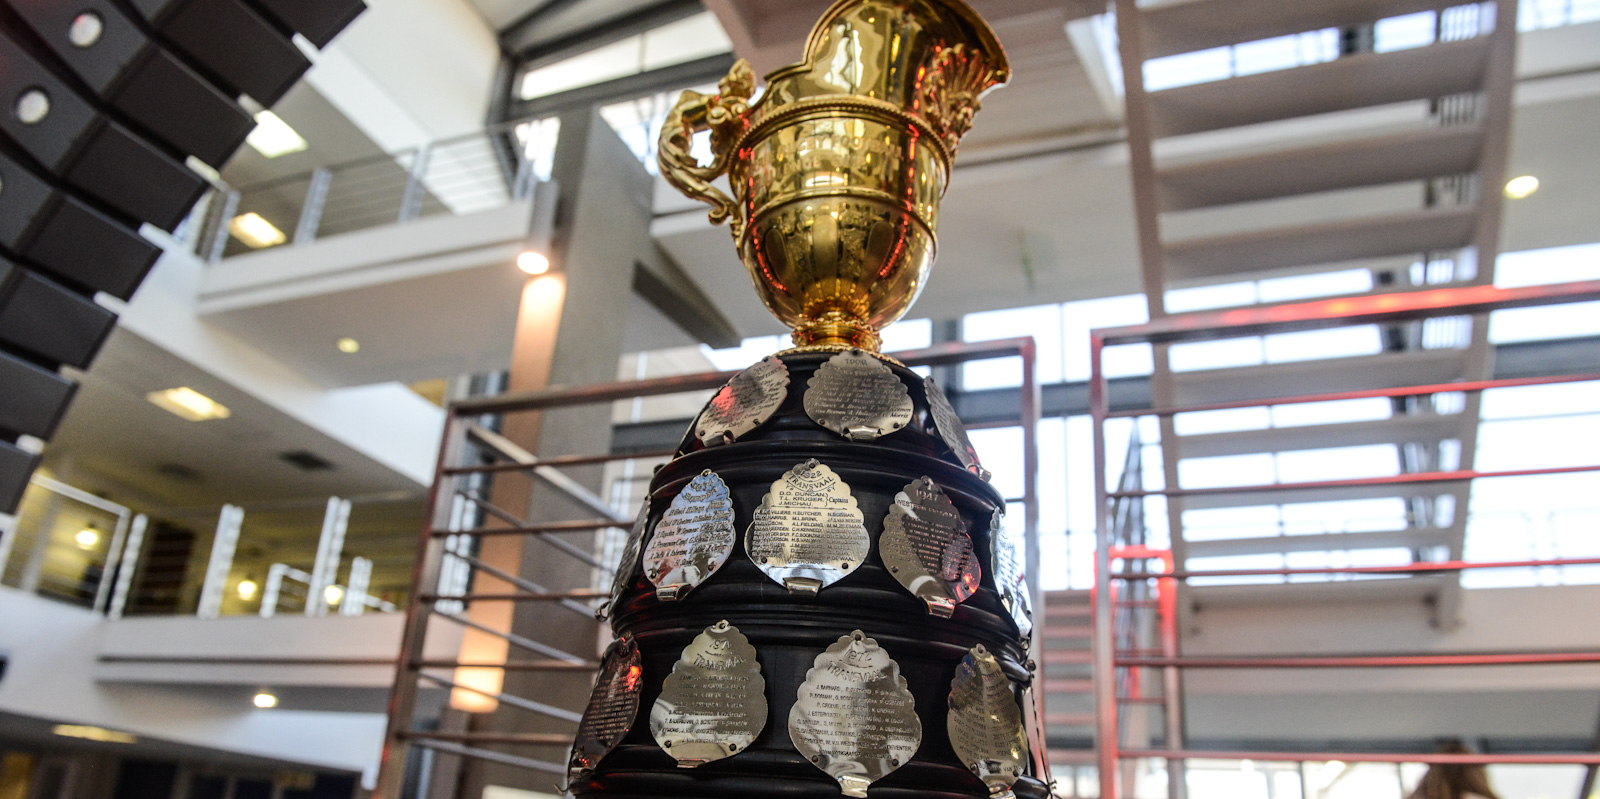 Up for grabs - the Currie Cup